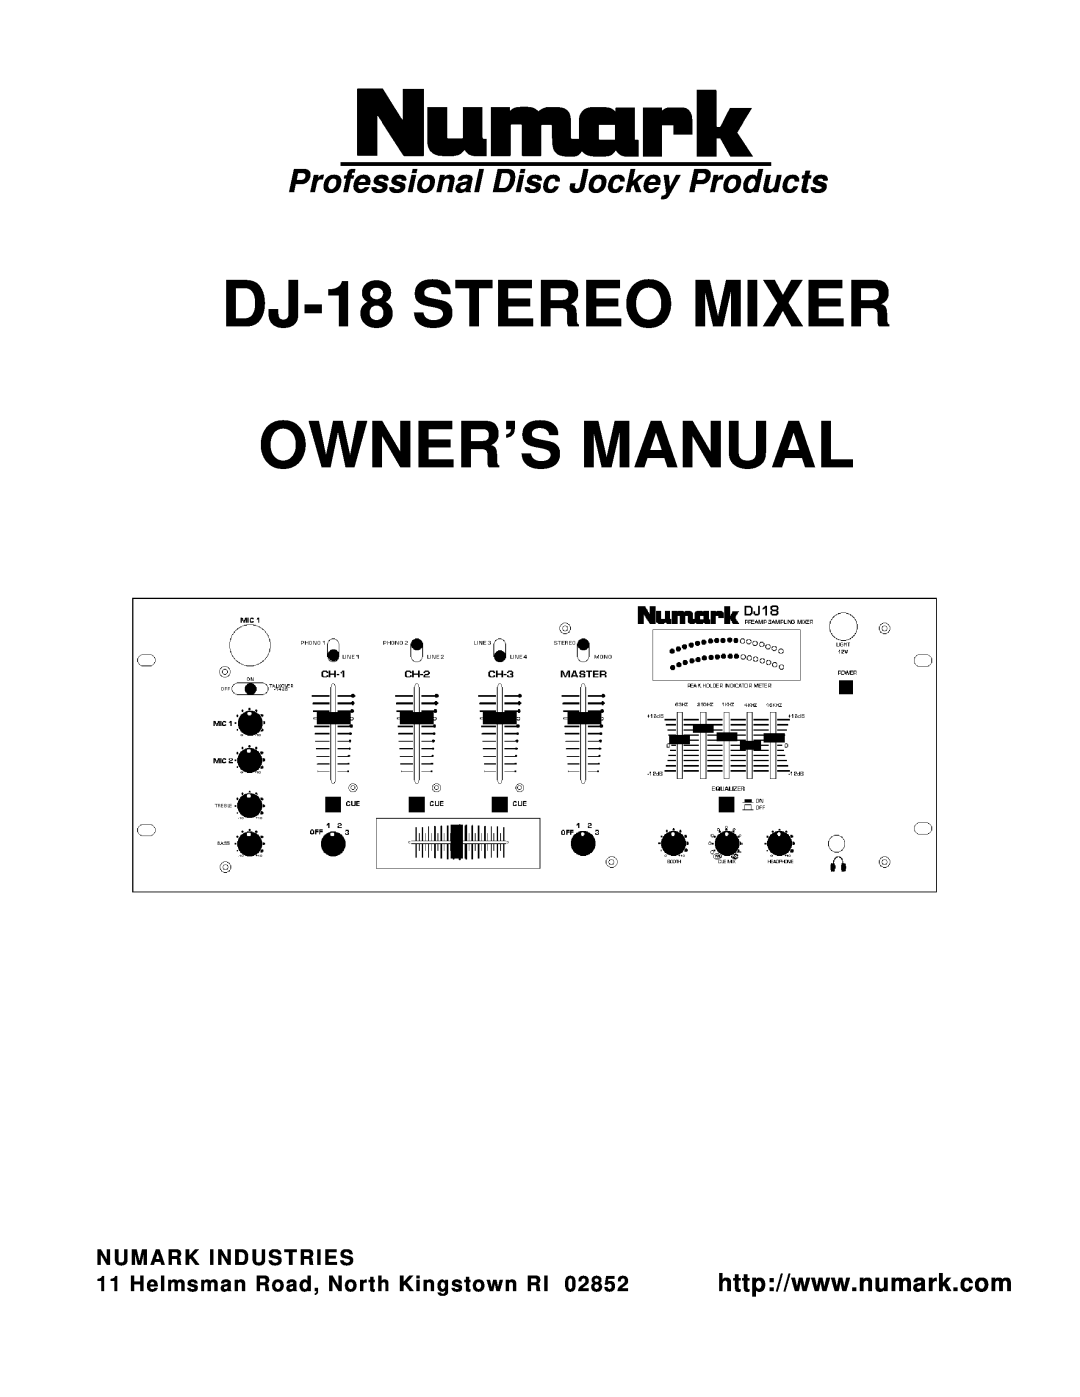 Numark Industries owner manual Professional Disc Jockey Products, DJ-18 STEREO MIXER OWNER’S MANUAL 